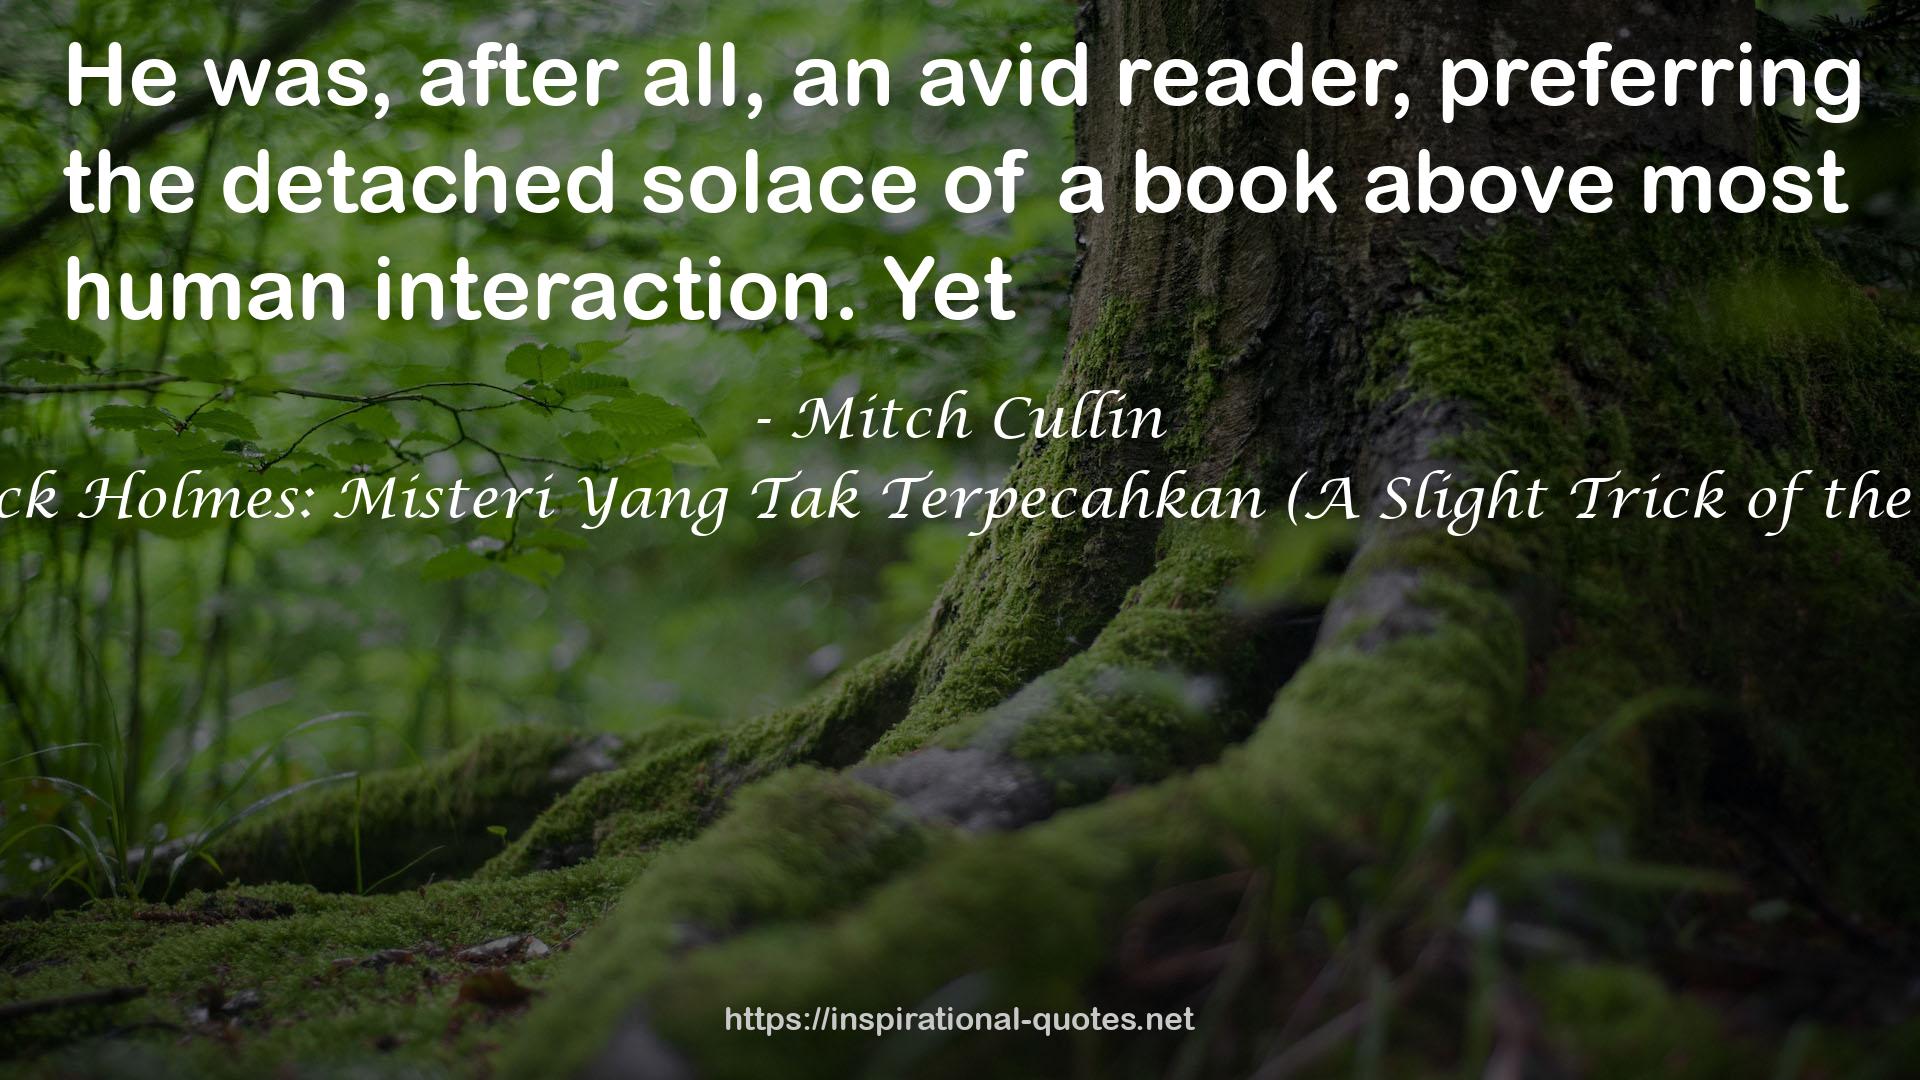 Mitch Cullin QUOTES